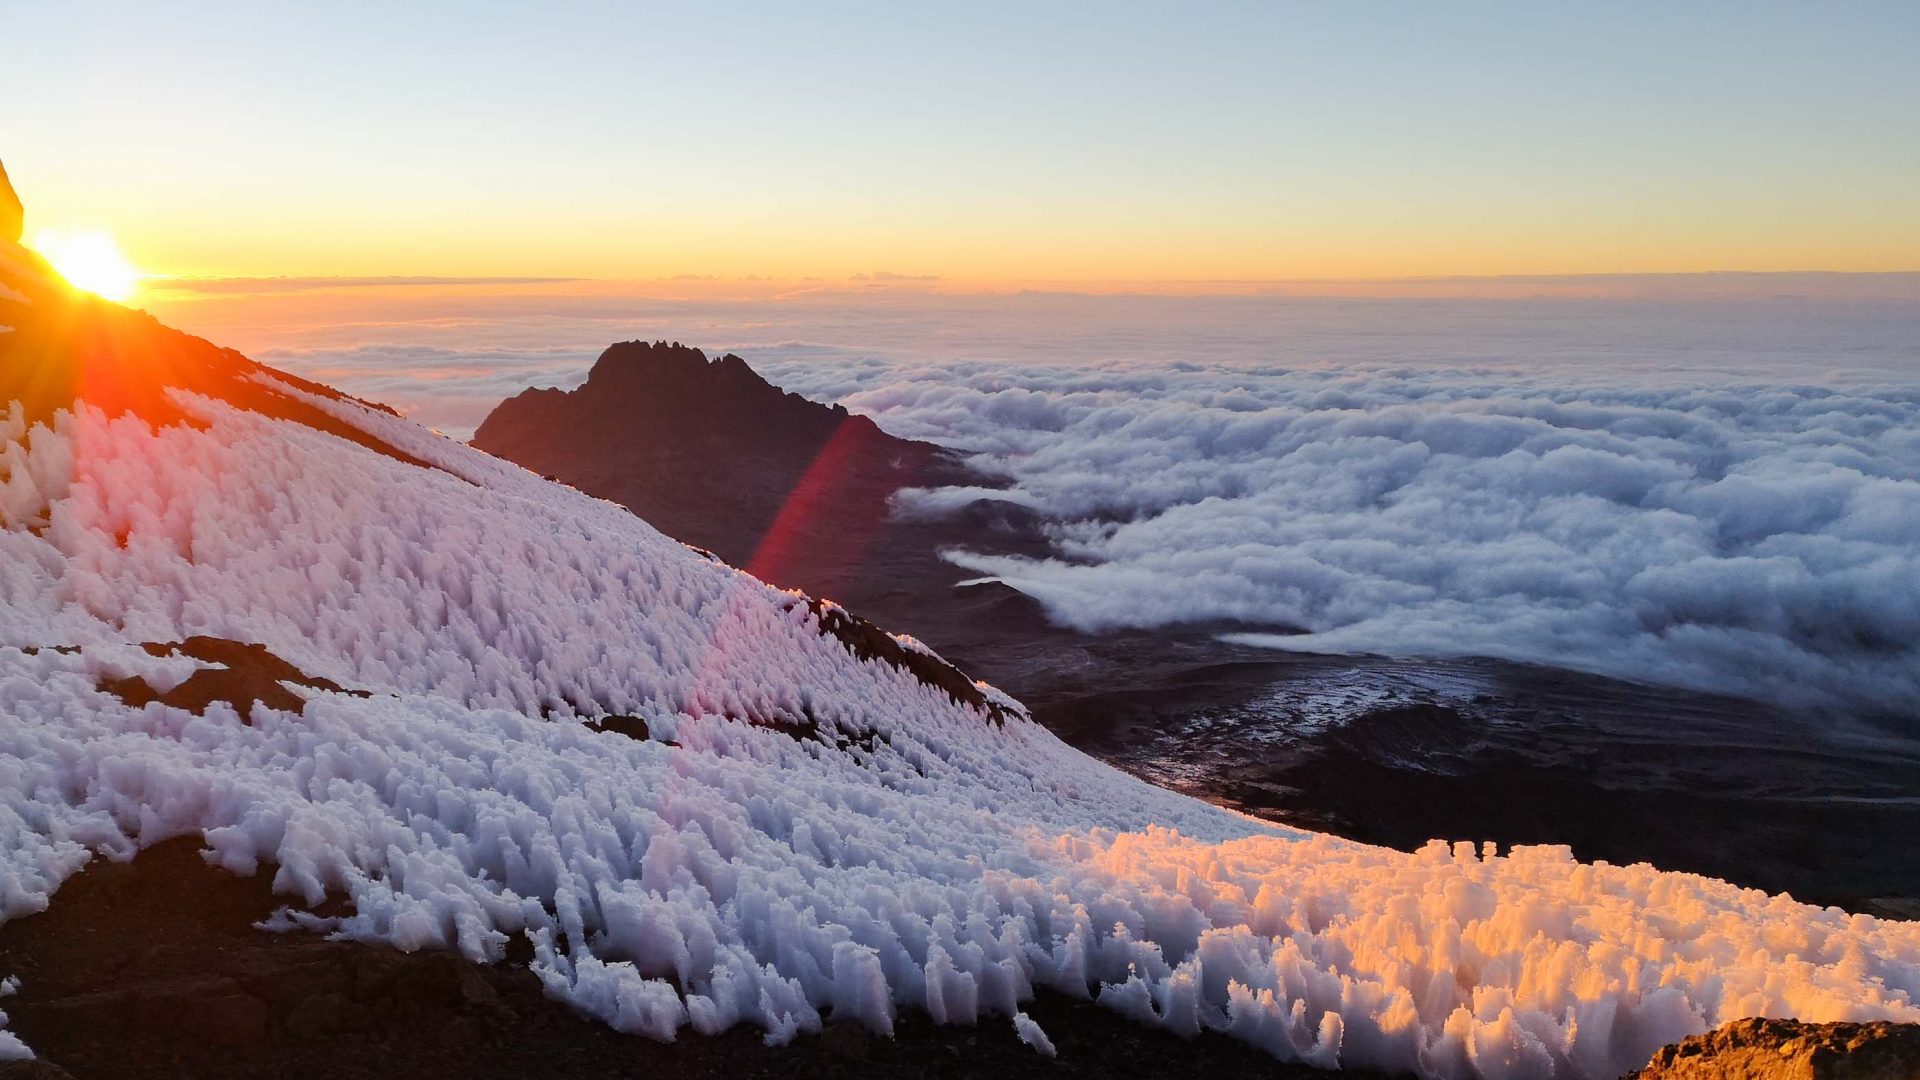 Post-pandemic, can we find better ways to climb Kilimanjaro?